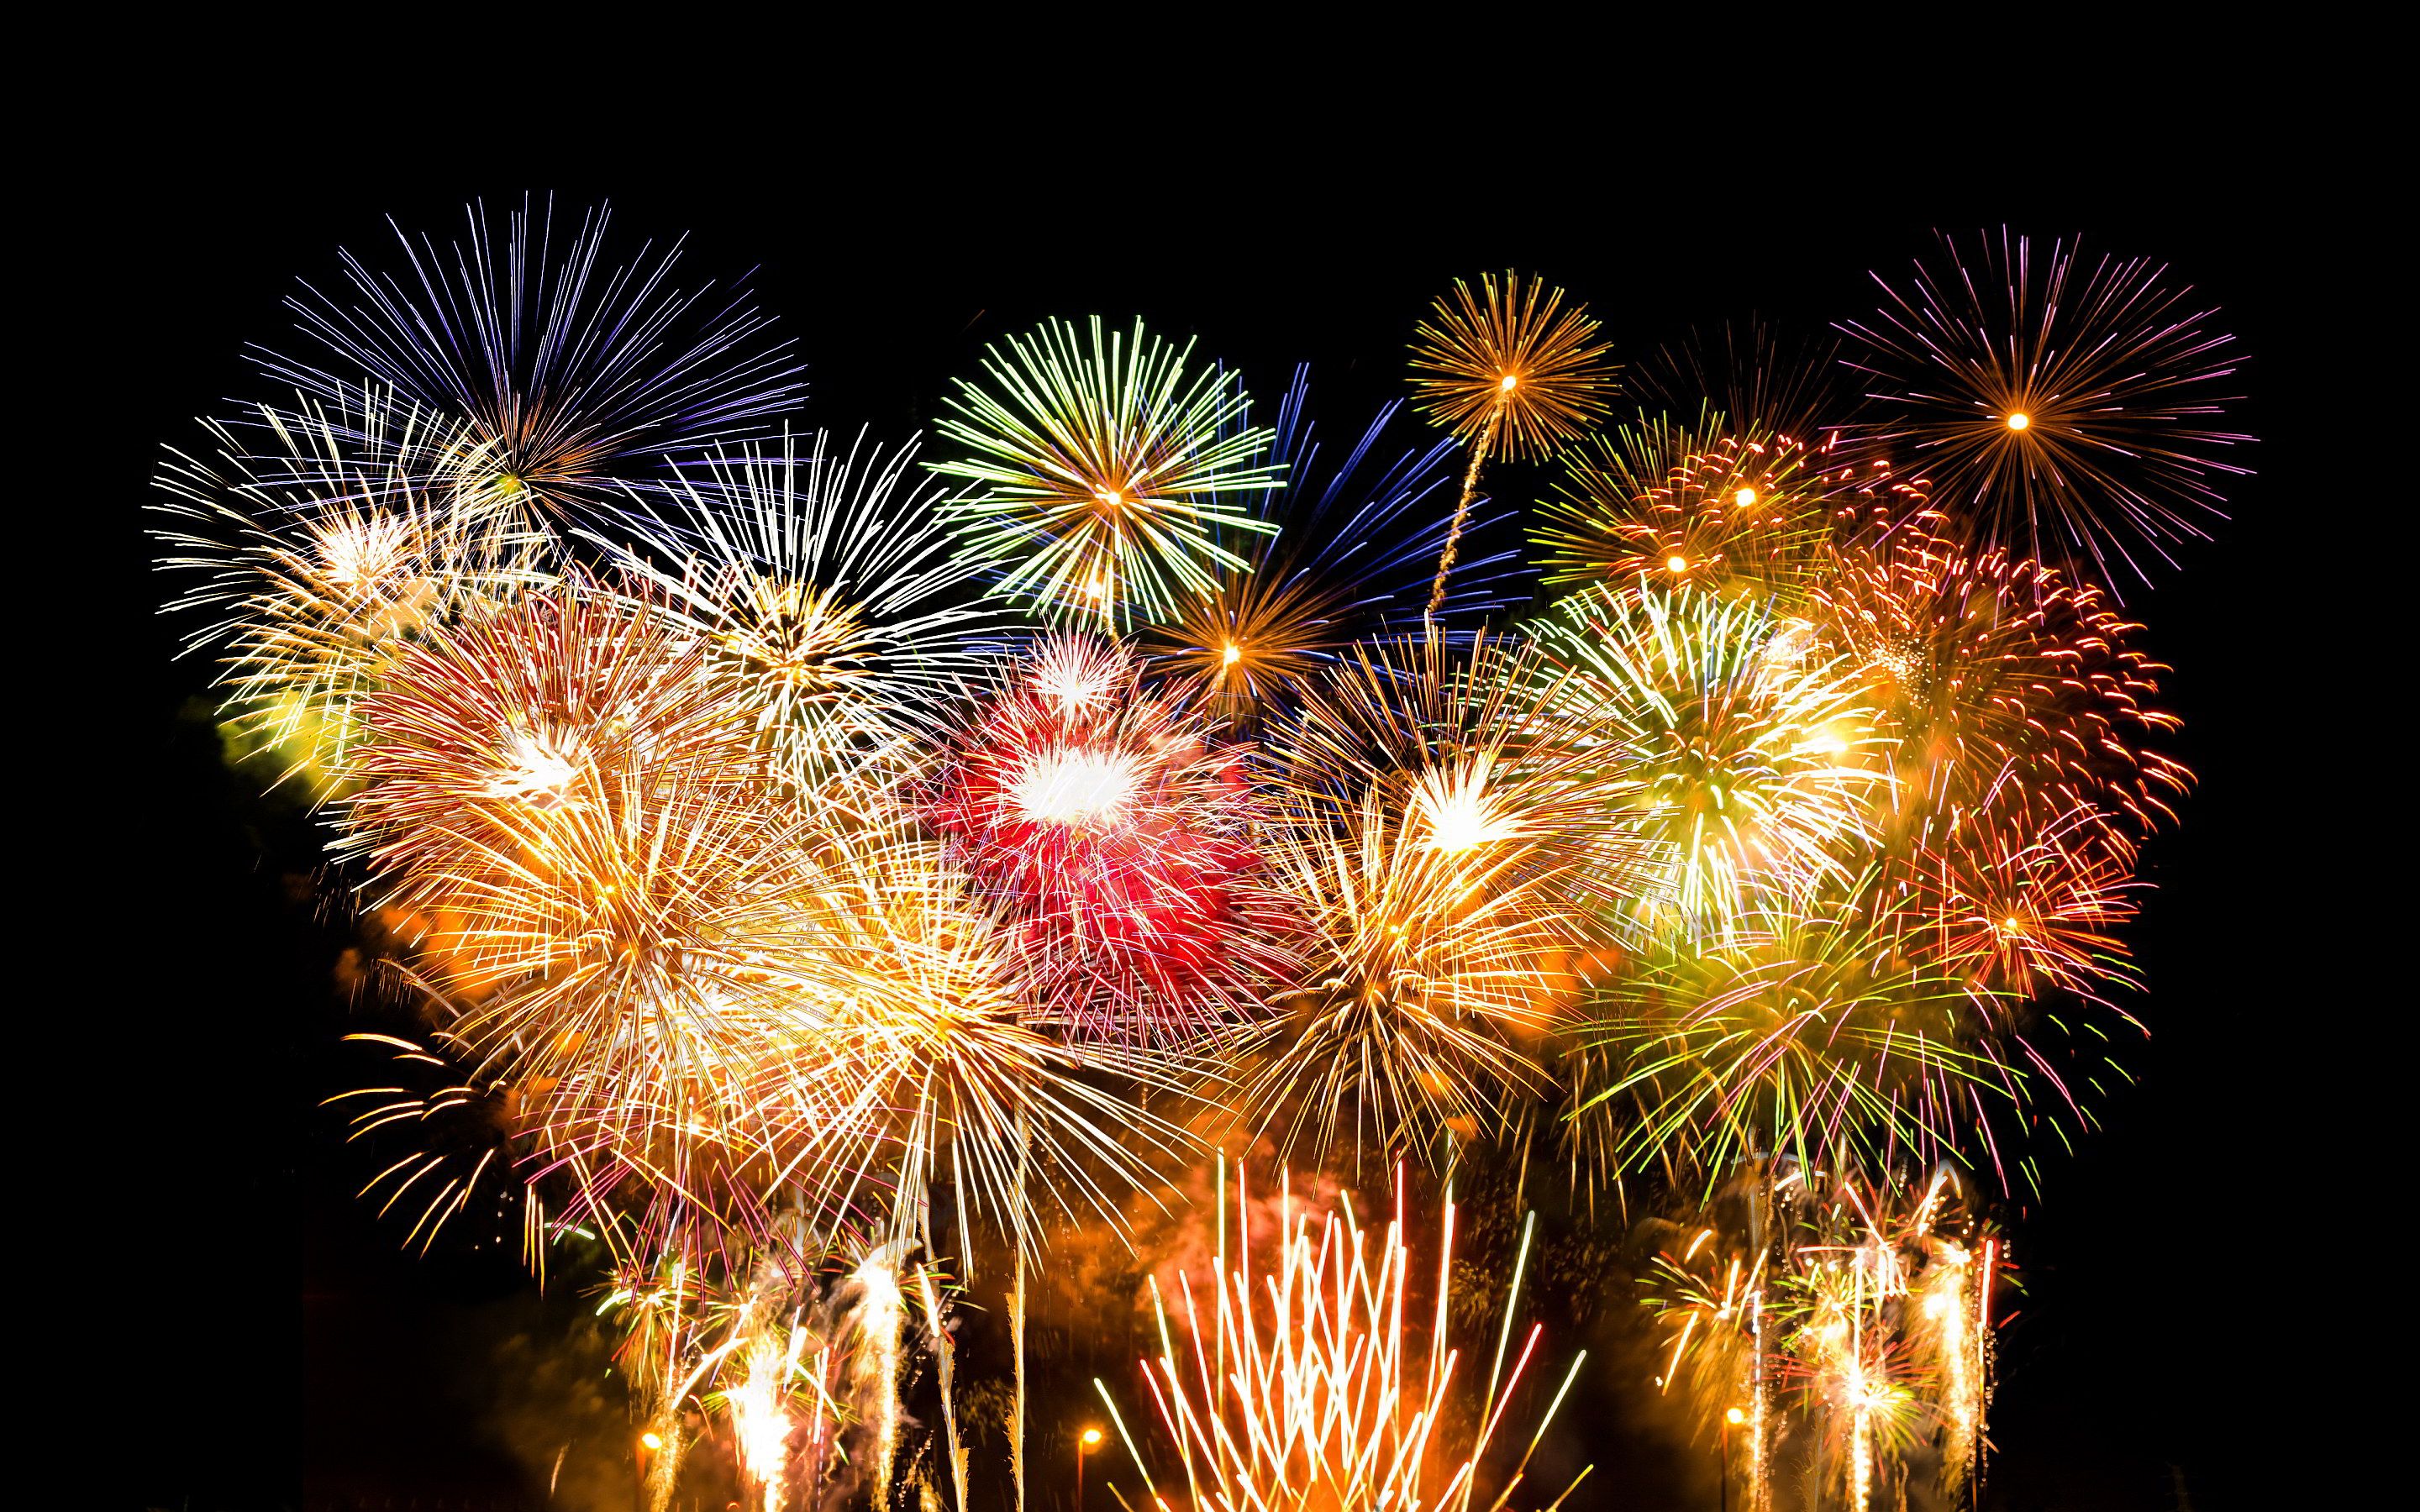 HD wallpaper, Fireworks, Colored